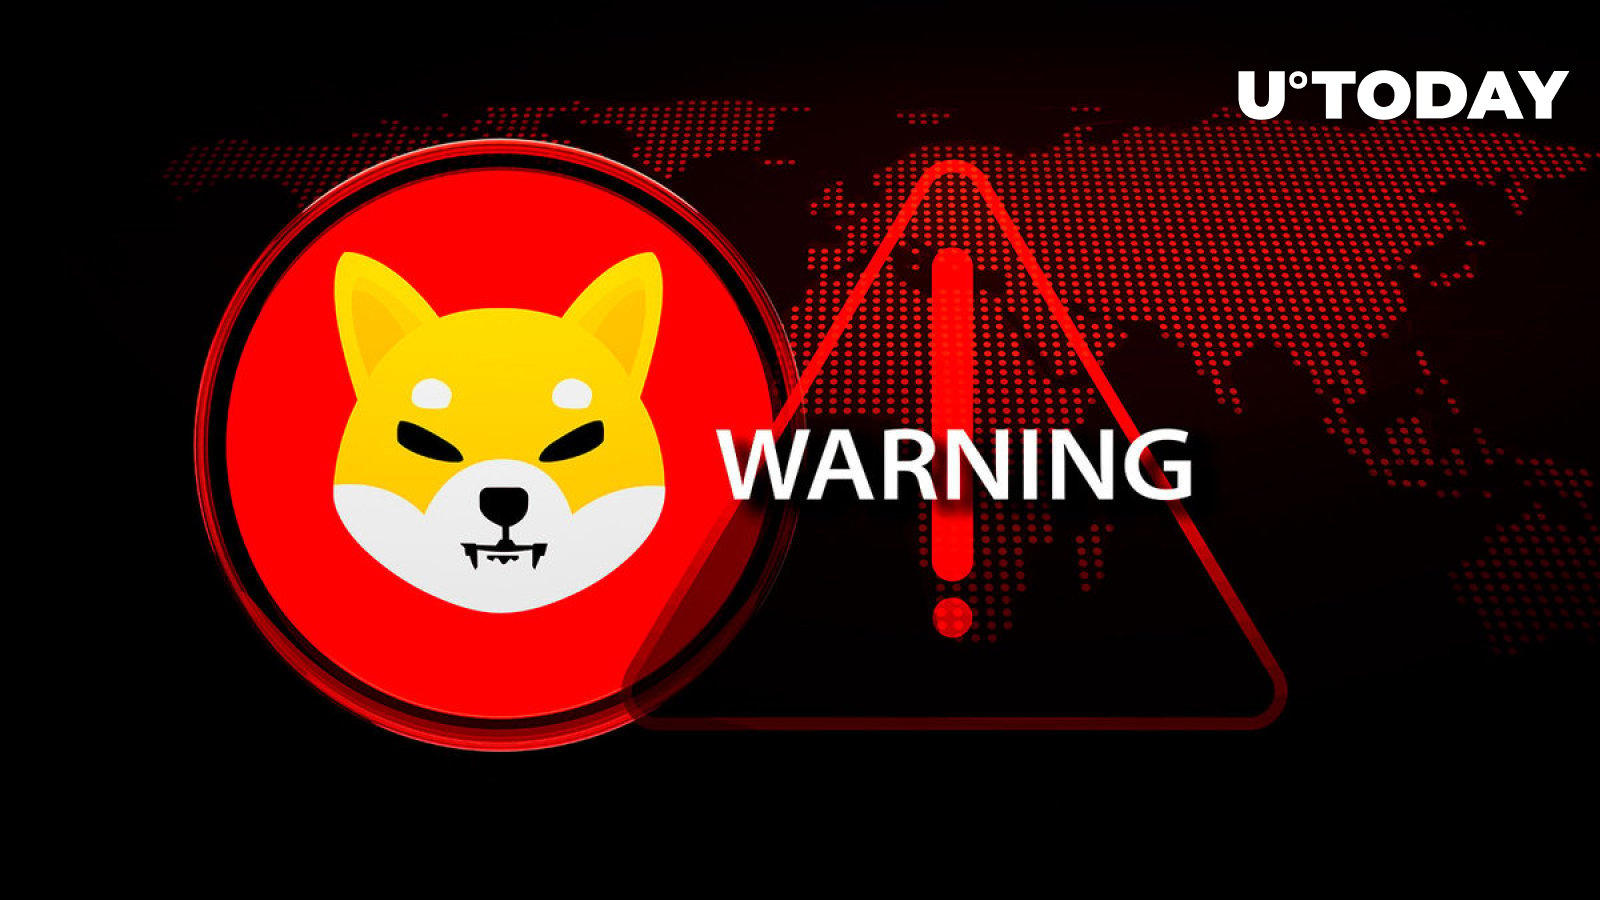 Shiba Inu (SHIB) Holders Must Pay Attention to This Urgent Warning: Details